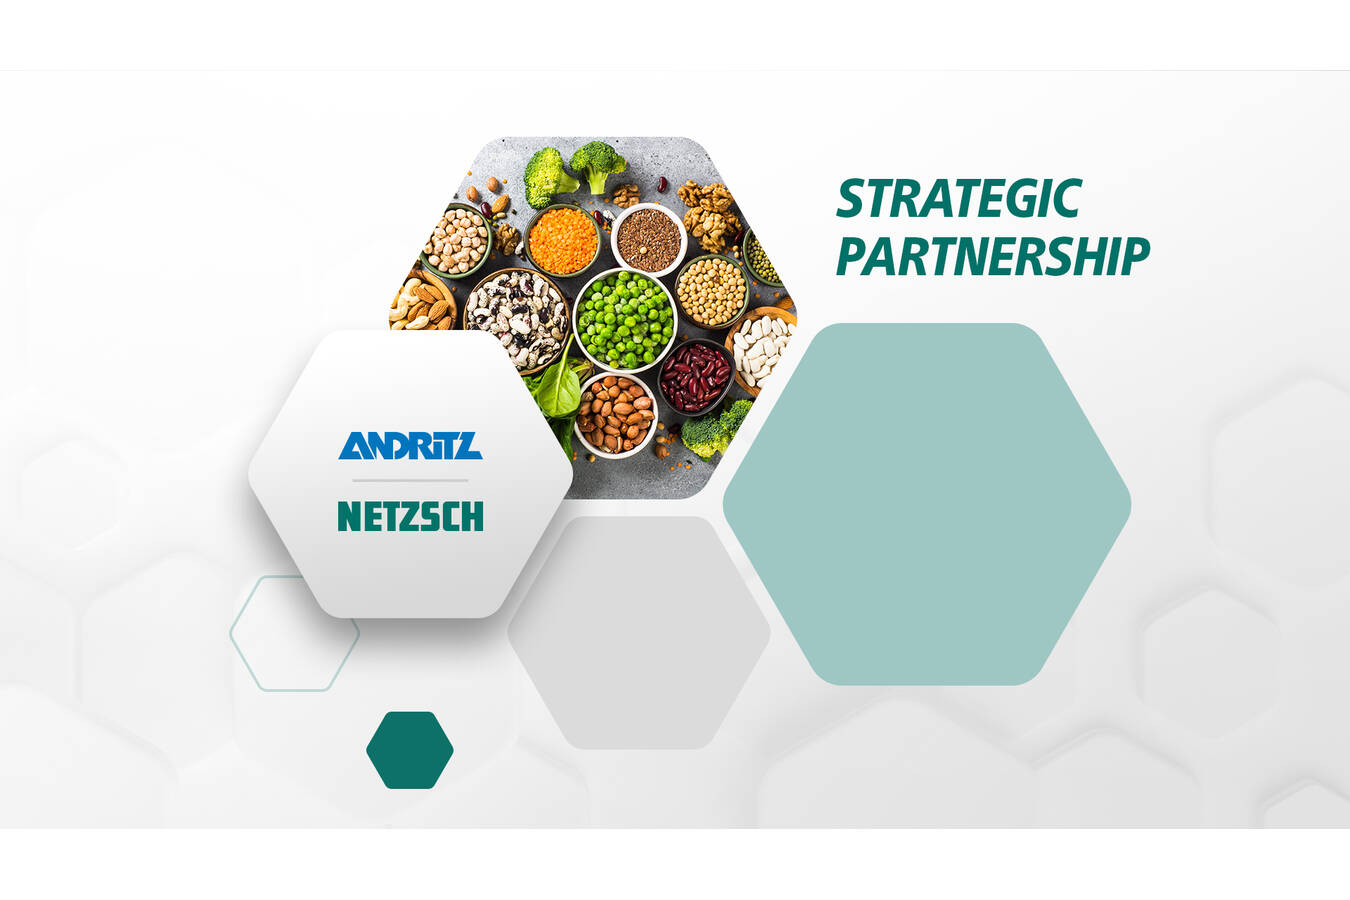 ANDRITZ enters partnership with NETZSCH-Feinmahltechnik GmbH Strategic partnership to collaborate on serving the alternative protein market with future-oriented technologies and processes.